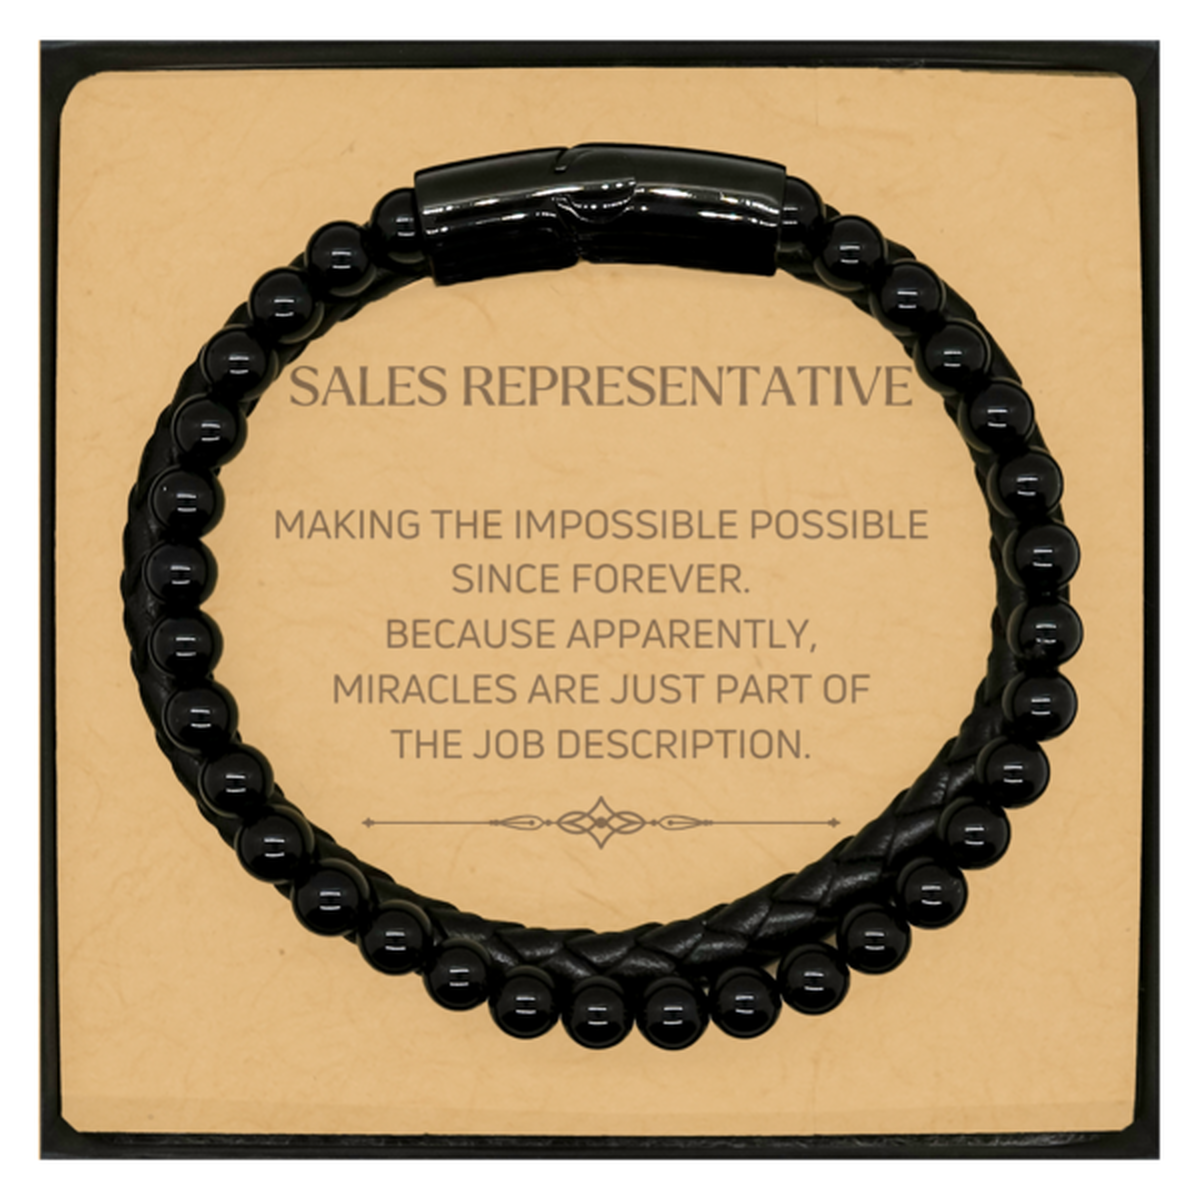 Funny Sales Representative Gifts, Miracles are just part of the job description, Inspirational Birthday Christmas Stone Leather Bracelets For Sales Representative, Men, Women, Coworkers, Friends, Boss